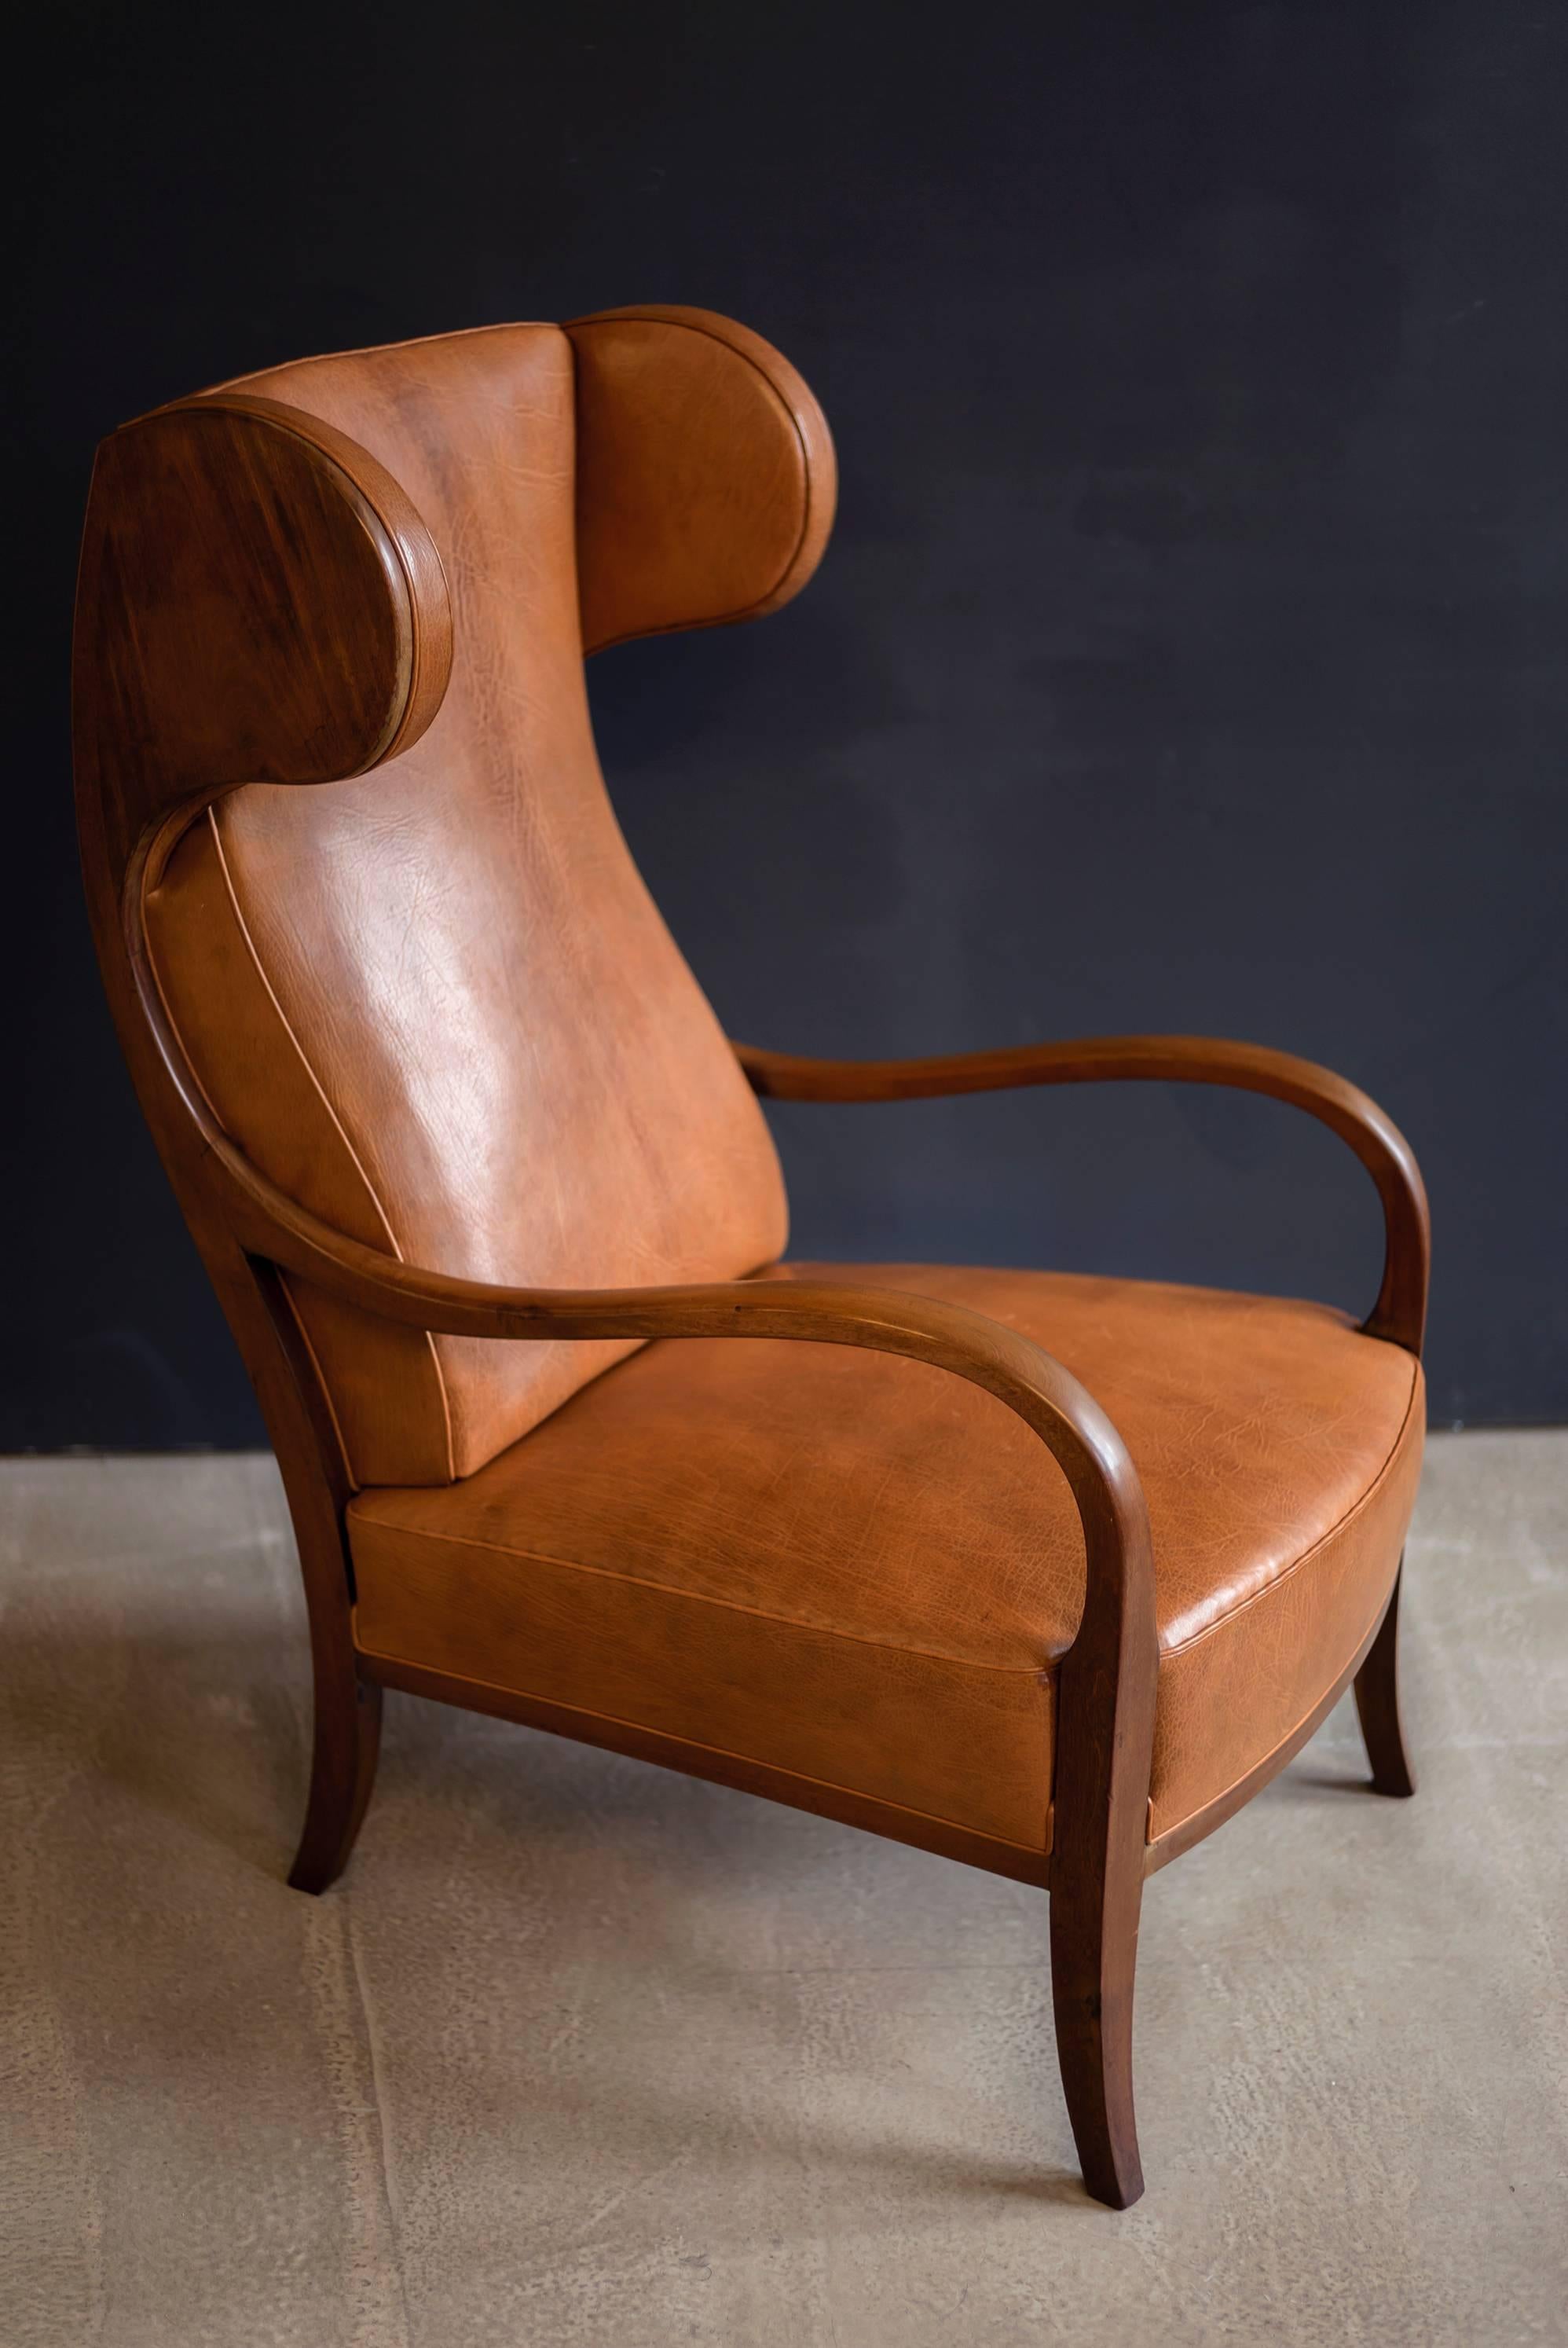 A large, elegant and sculptural 1940s wingback chair with sweeping arms and curved headrests. Frame of Cuban mahogany. Upholstered in Nigerian goatskin.